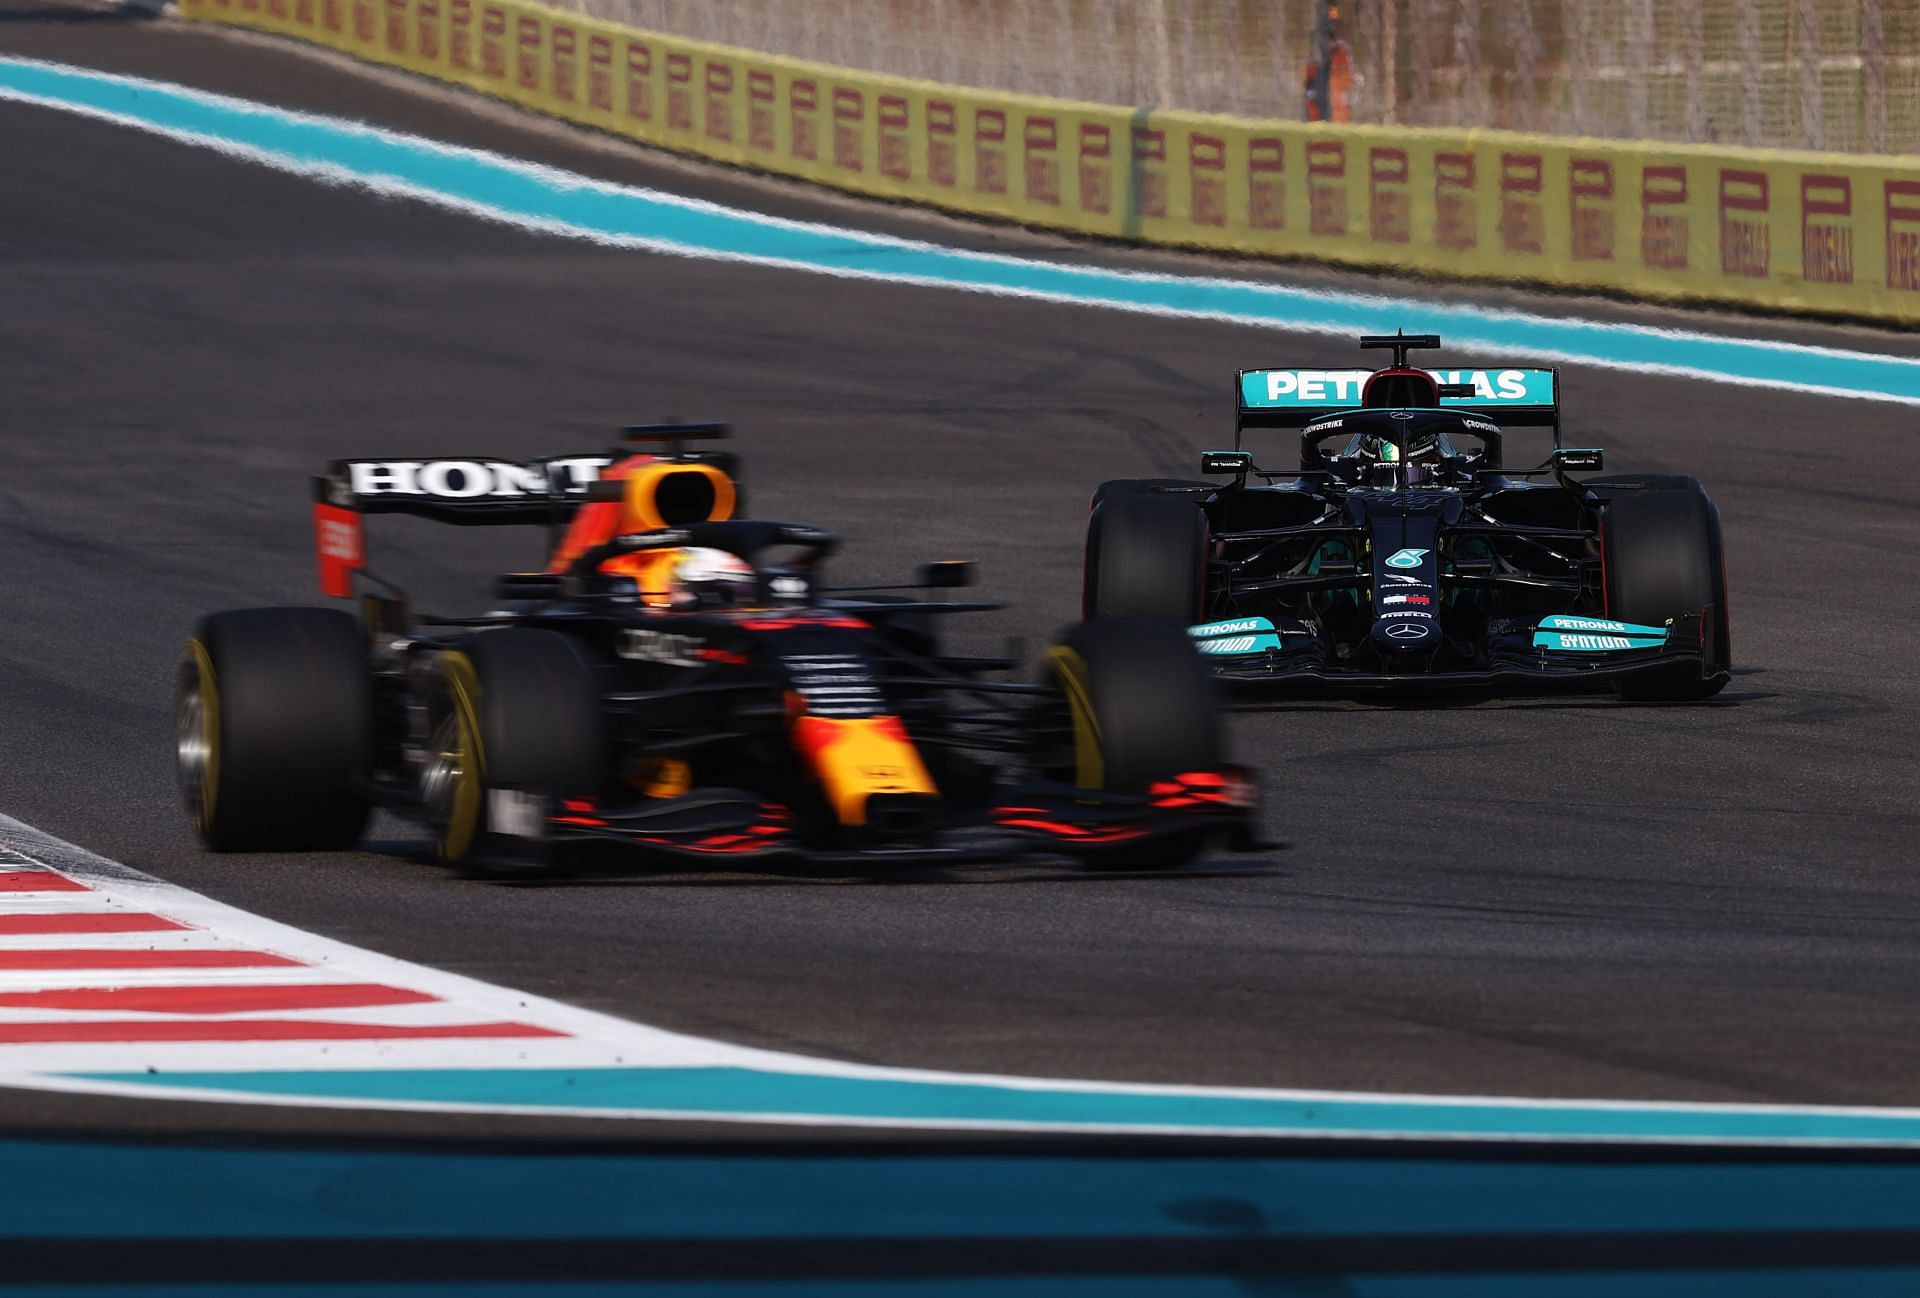 Lewis Hamilton (44) follows Max Verstappen (33) during final practice ahead of the 2021 F1 Abu Dhabi Grand Prix (Image via Lars Baron/Getty Images)